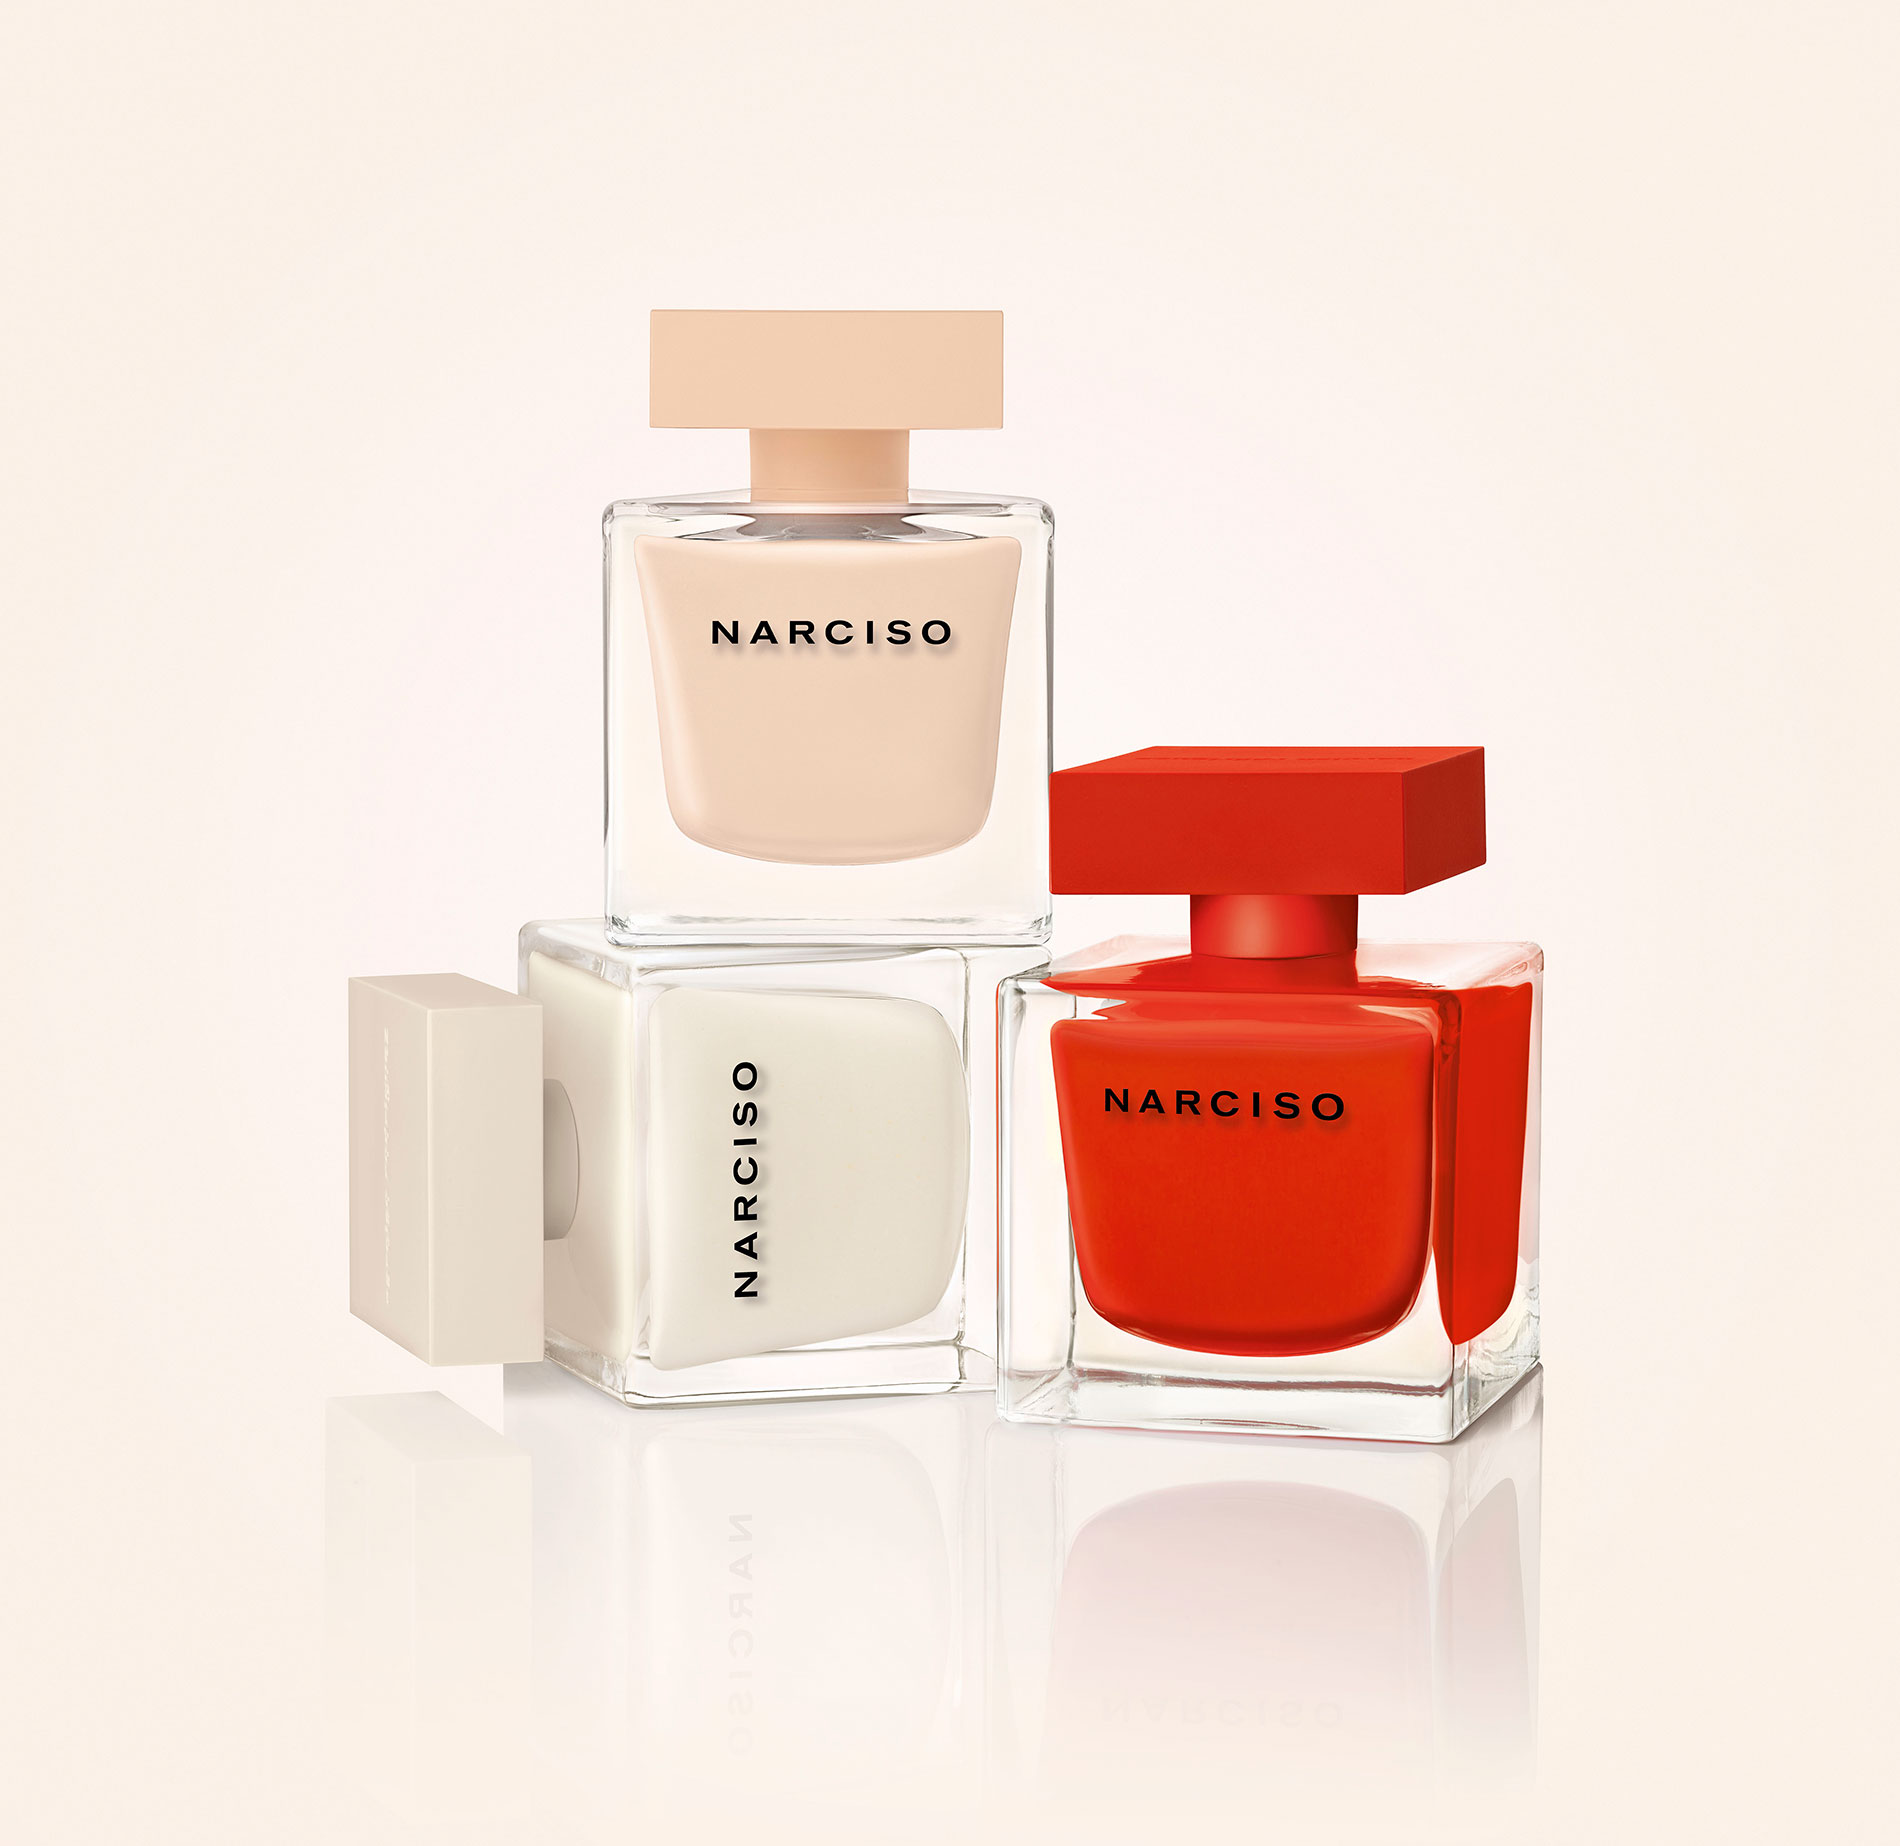 Аромат narciso rodriguez. Narciso rouge Eau de Toilette. Духи Narciso Rodriguez Narciso. Narciso Rodriguez Narciso rouge. Narciso Rodriguez Narciso Eau de Parfum rouge.